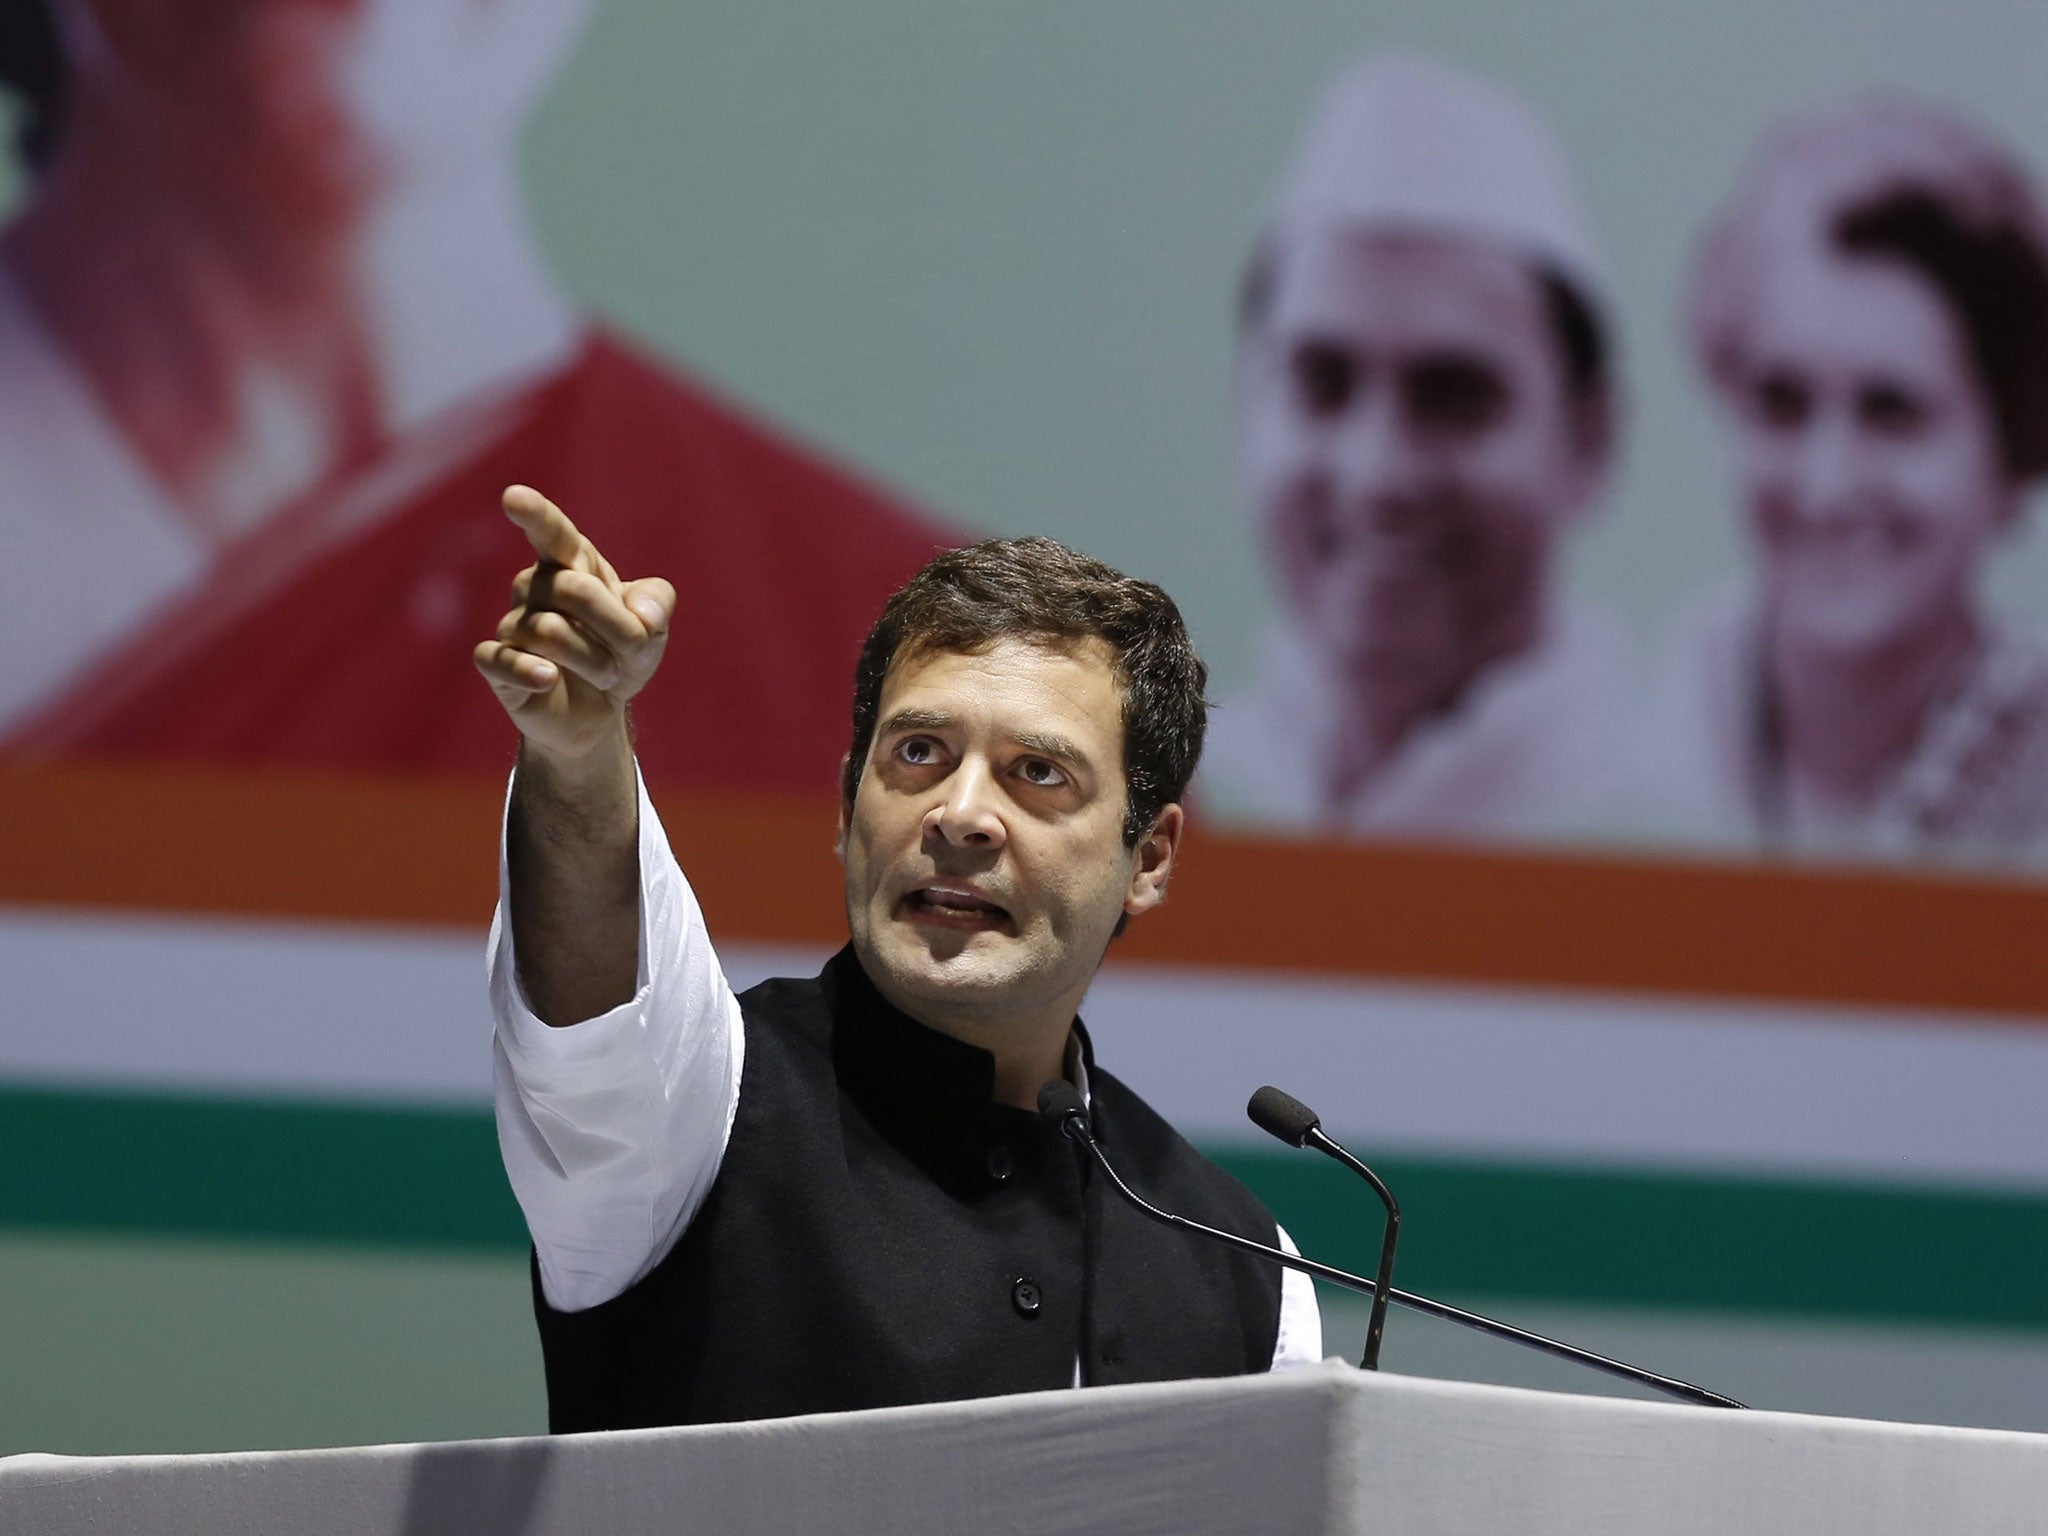 Rahul Gandhi has described himself as a warrior 'ready to go into battle'